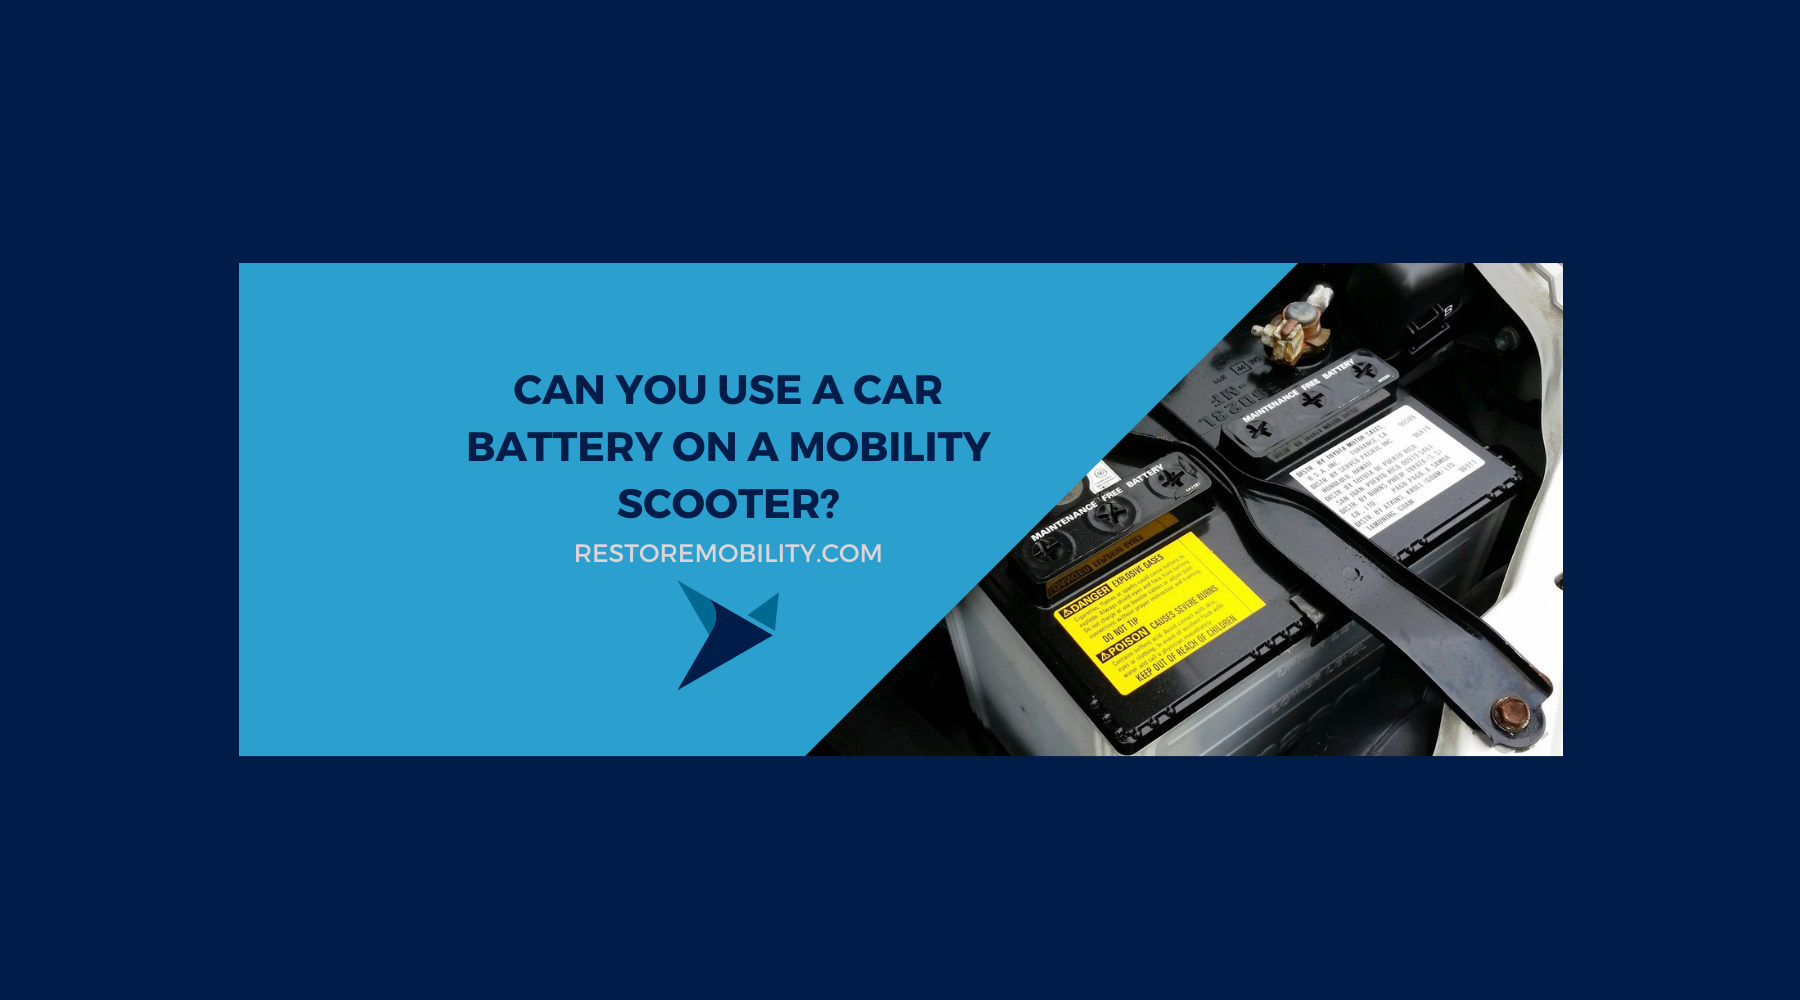 Can You Use a Car Battery on a Mobility Scooter?